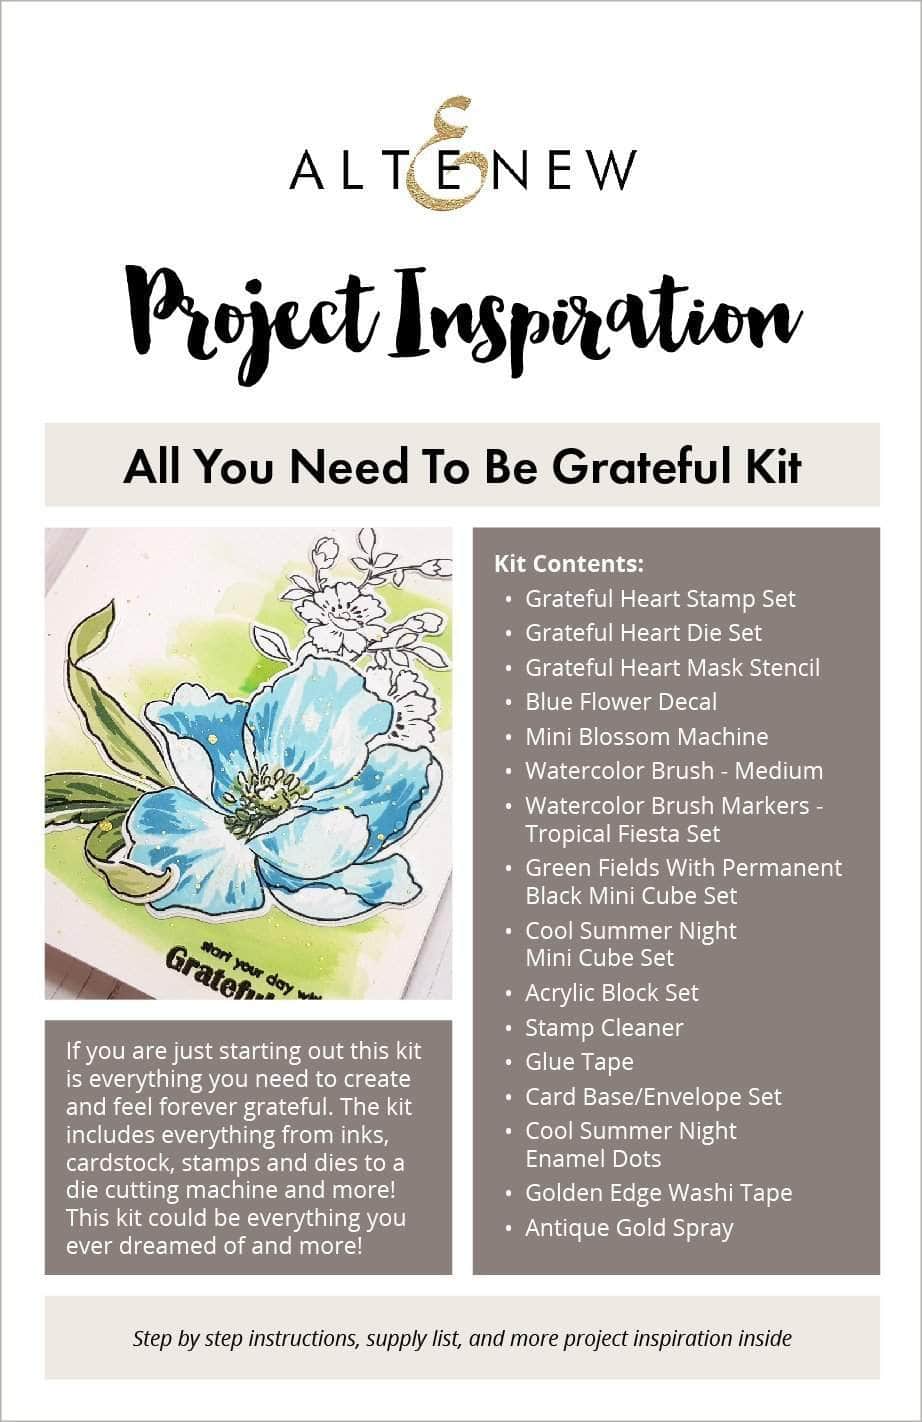 Printed Media All You Need To Be Grateful Kit Inspiration Guide